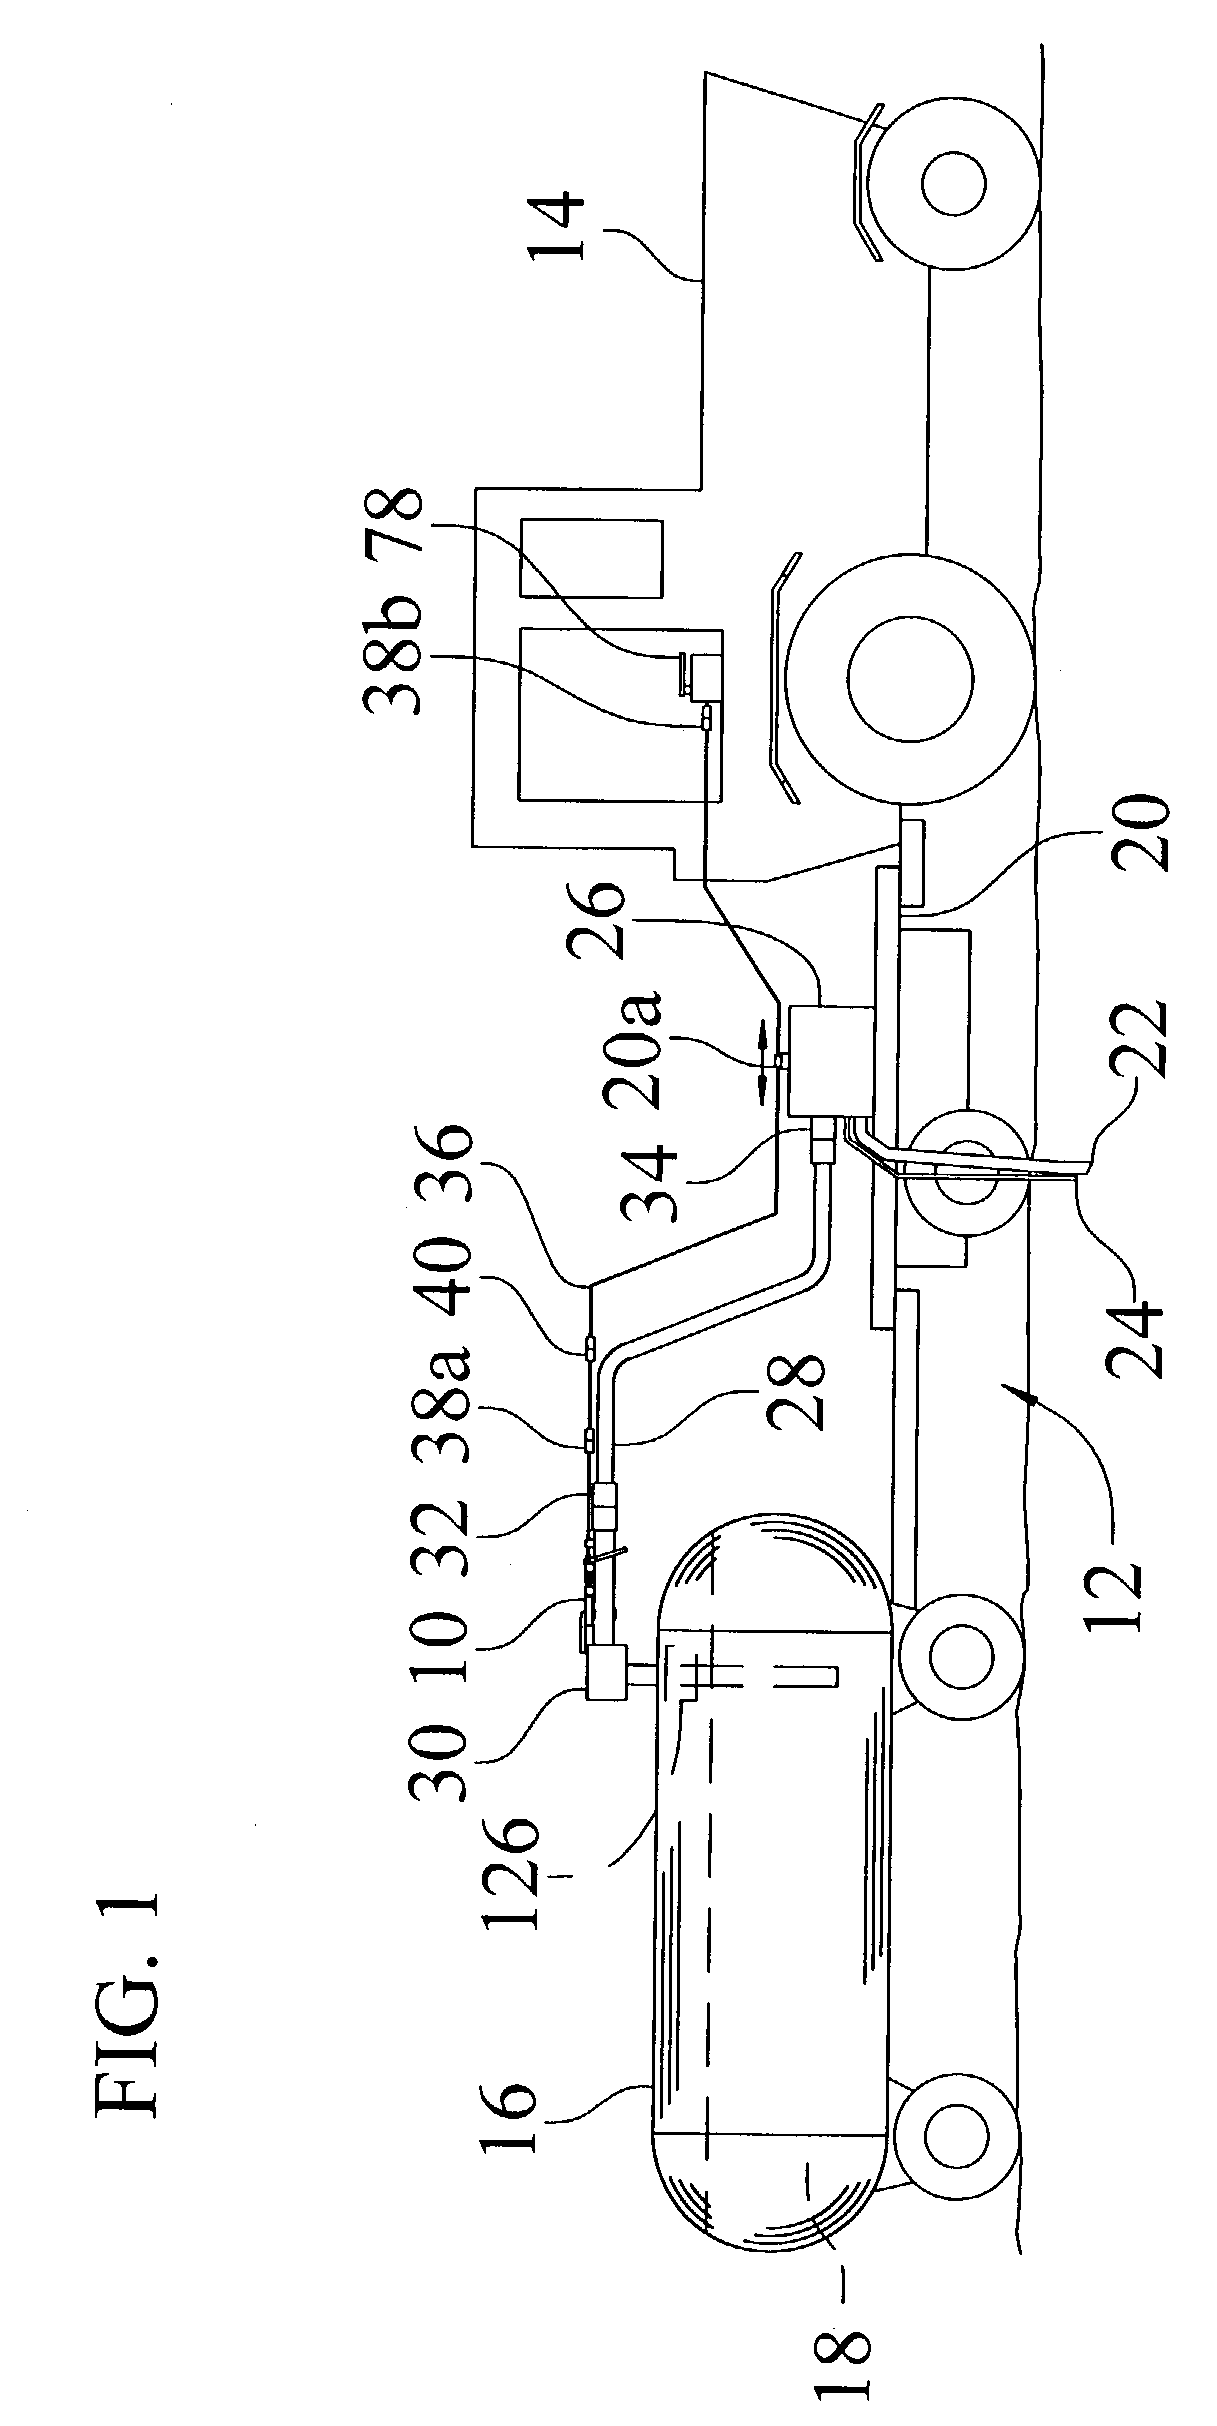 Safety system for mobile anhydrous ammonia fertilizer system